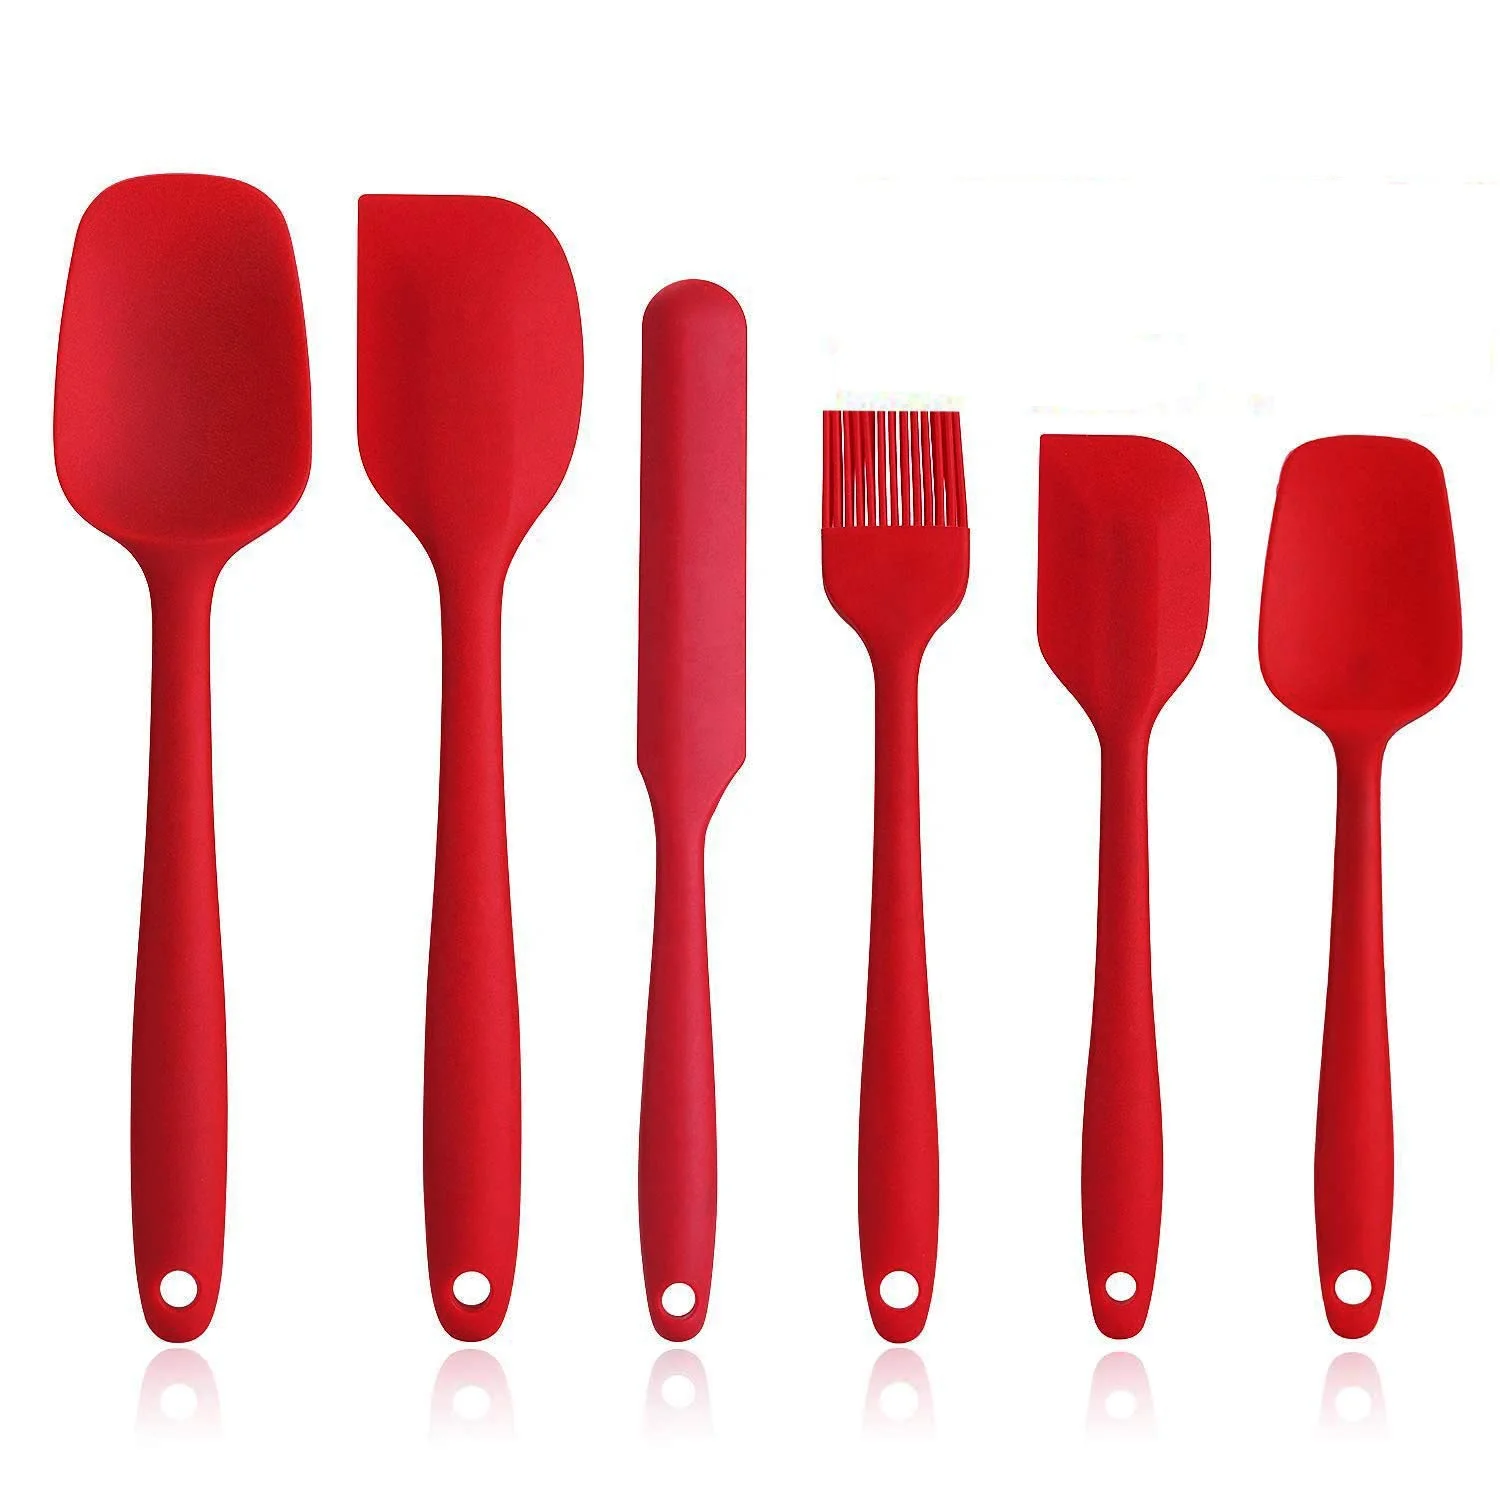 kitchen accessories new products 2023 eco-friendly 6 pcs silicone cooking kitchen utensils silicone kitchenware utensils